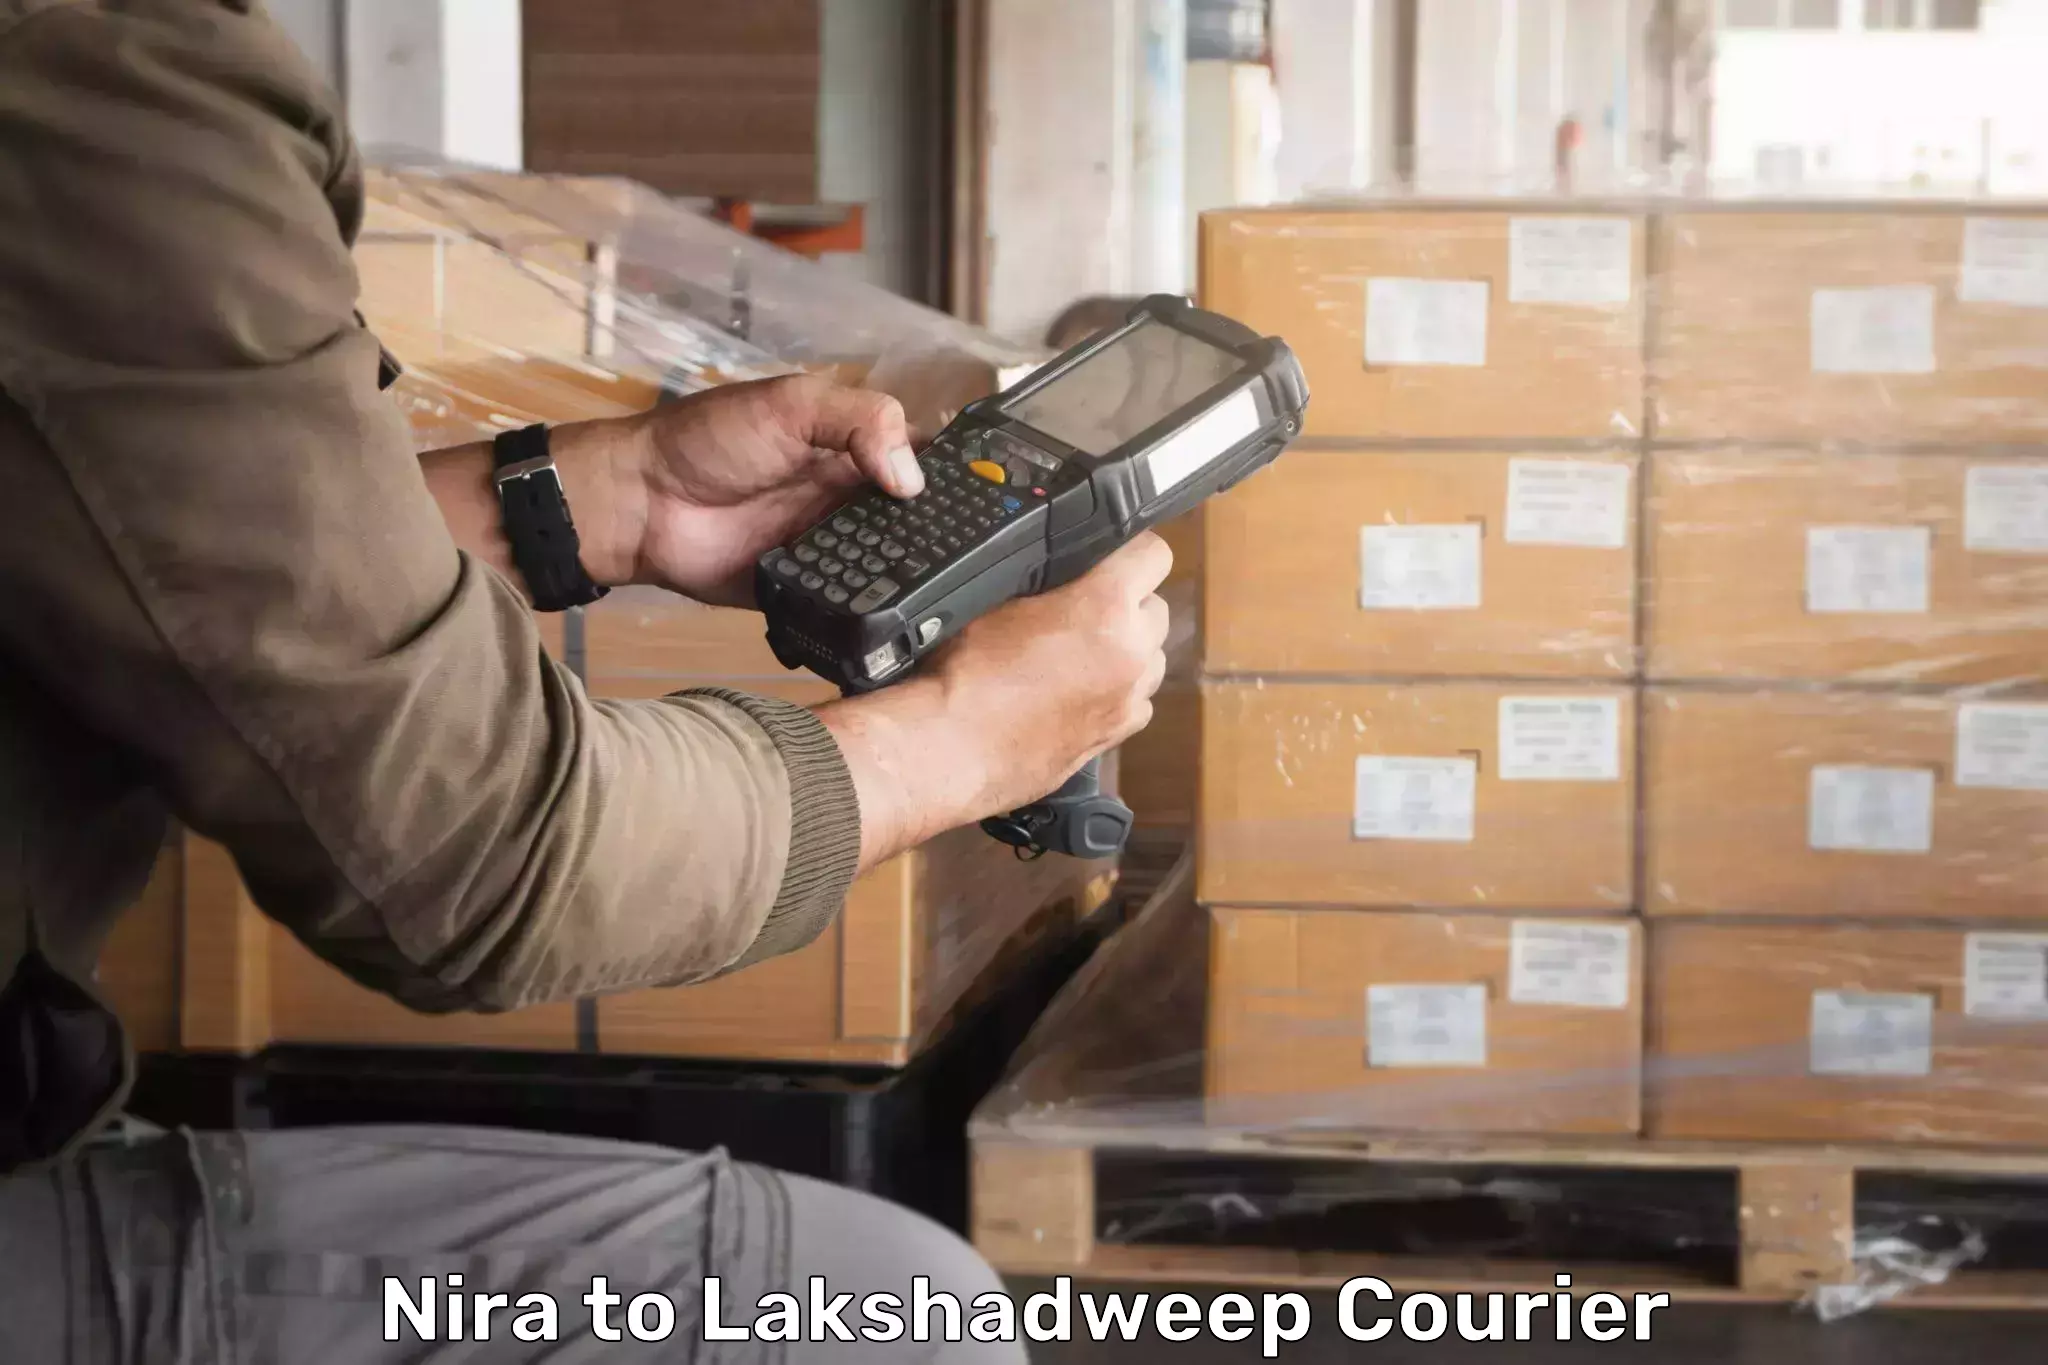 Local delivery service Nira to Lakshadweep